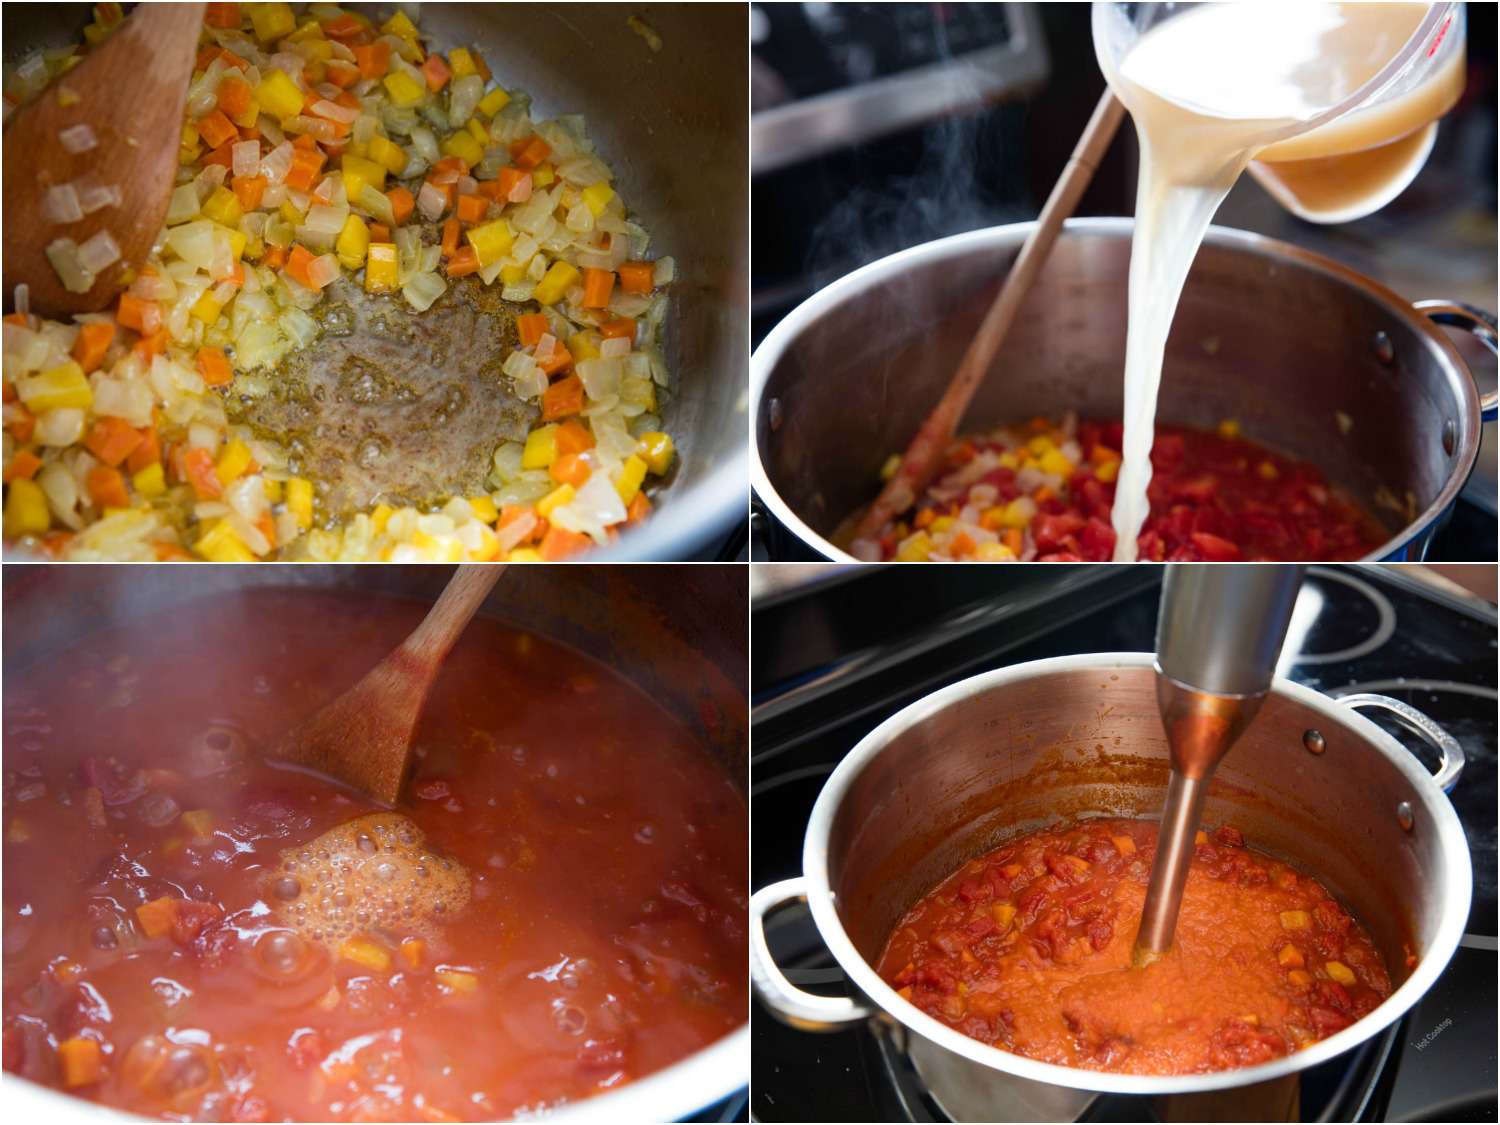 Collage of making tomato basil soup: sautéing vegetables in a pot, adding tomatoes and stock, stirring with a wooden soup, puréeing with an immersion blender